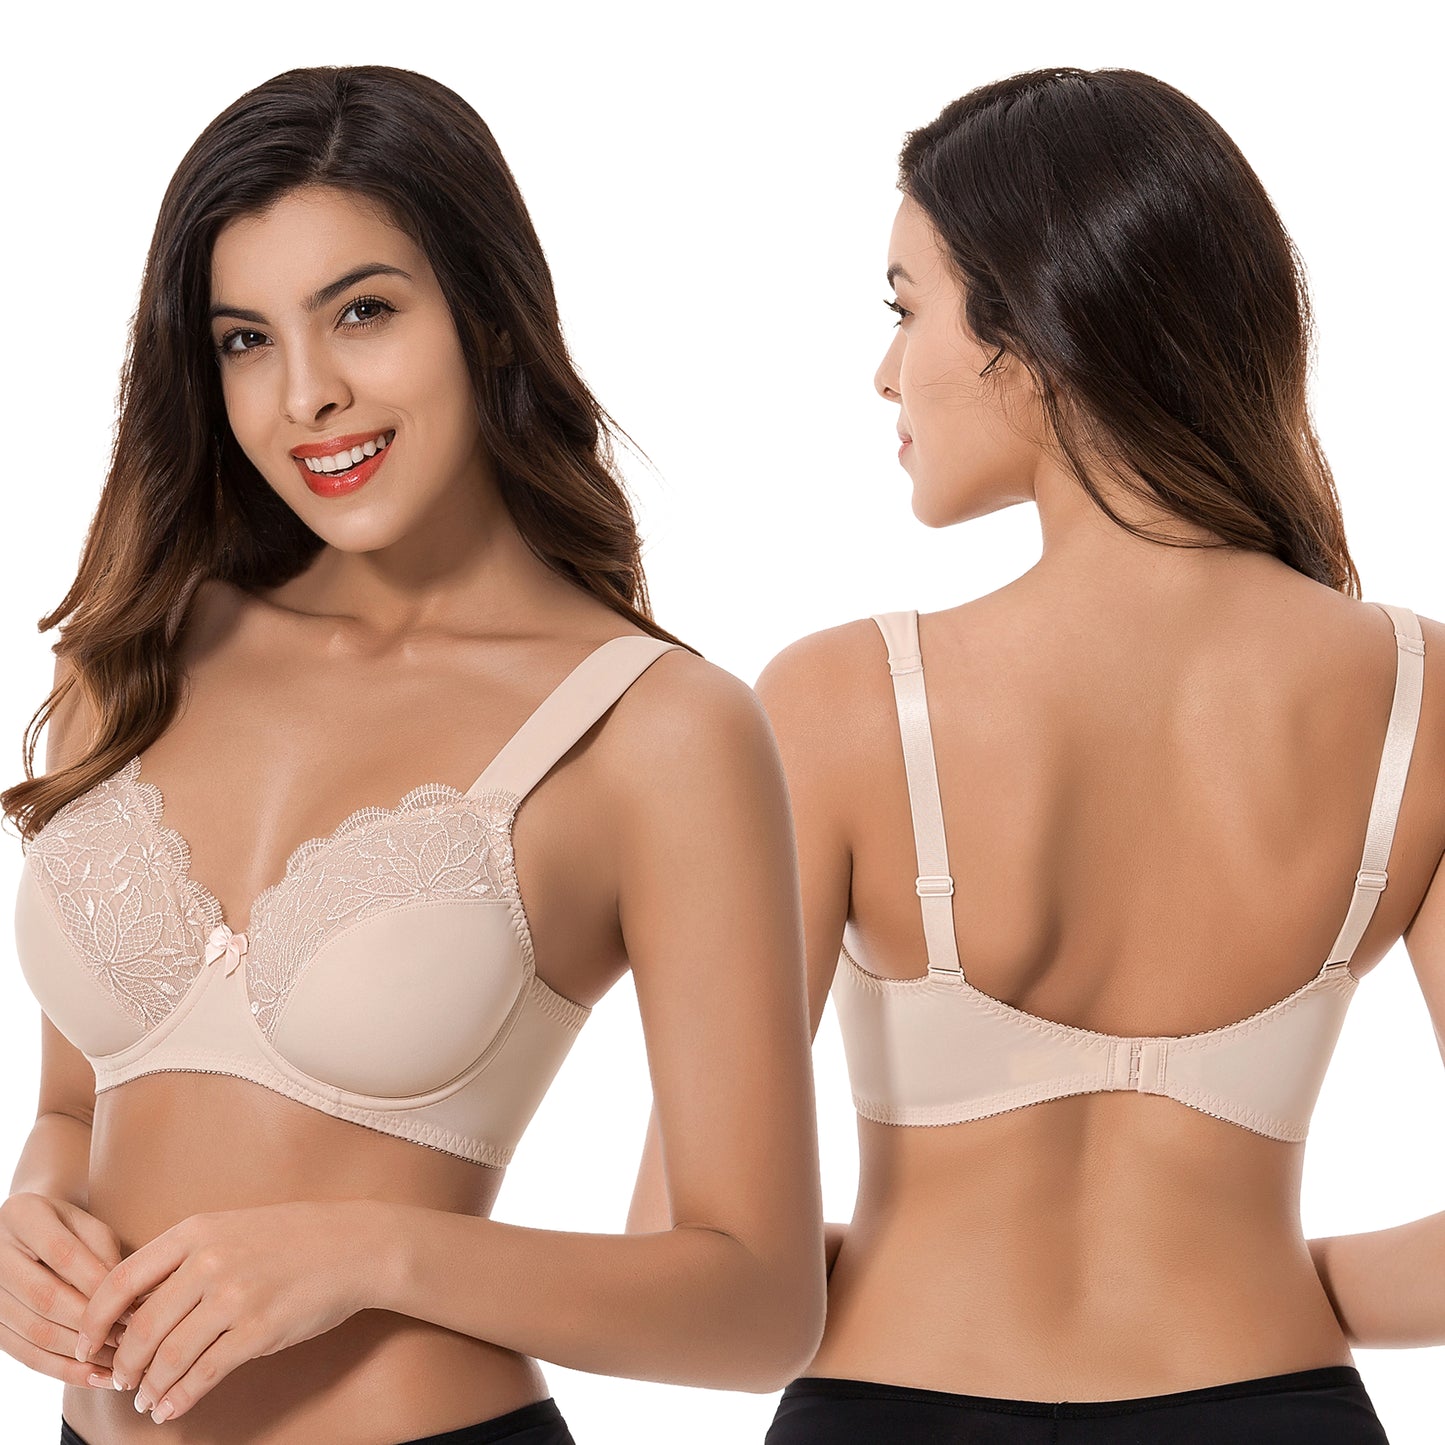 Plus Size Unline Minimizer Underwire Bra with Embroidery Lace-3Pack